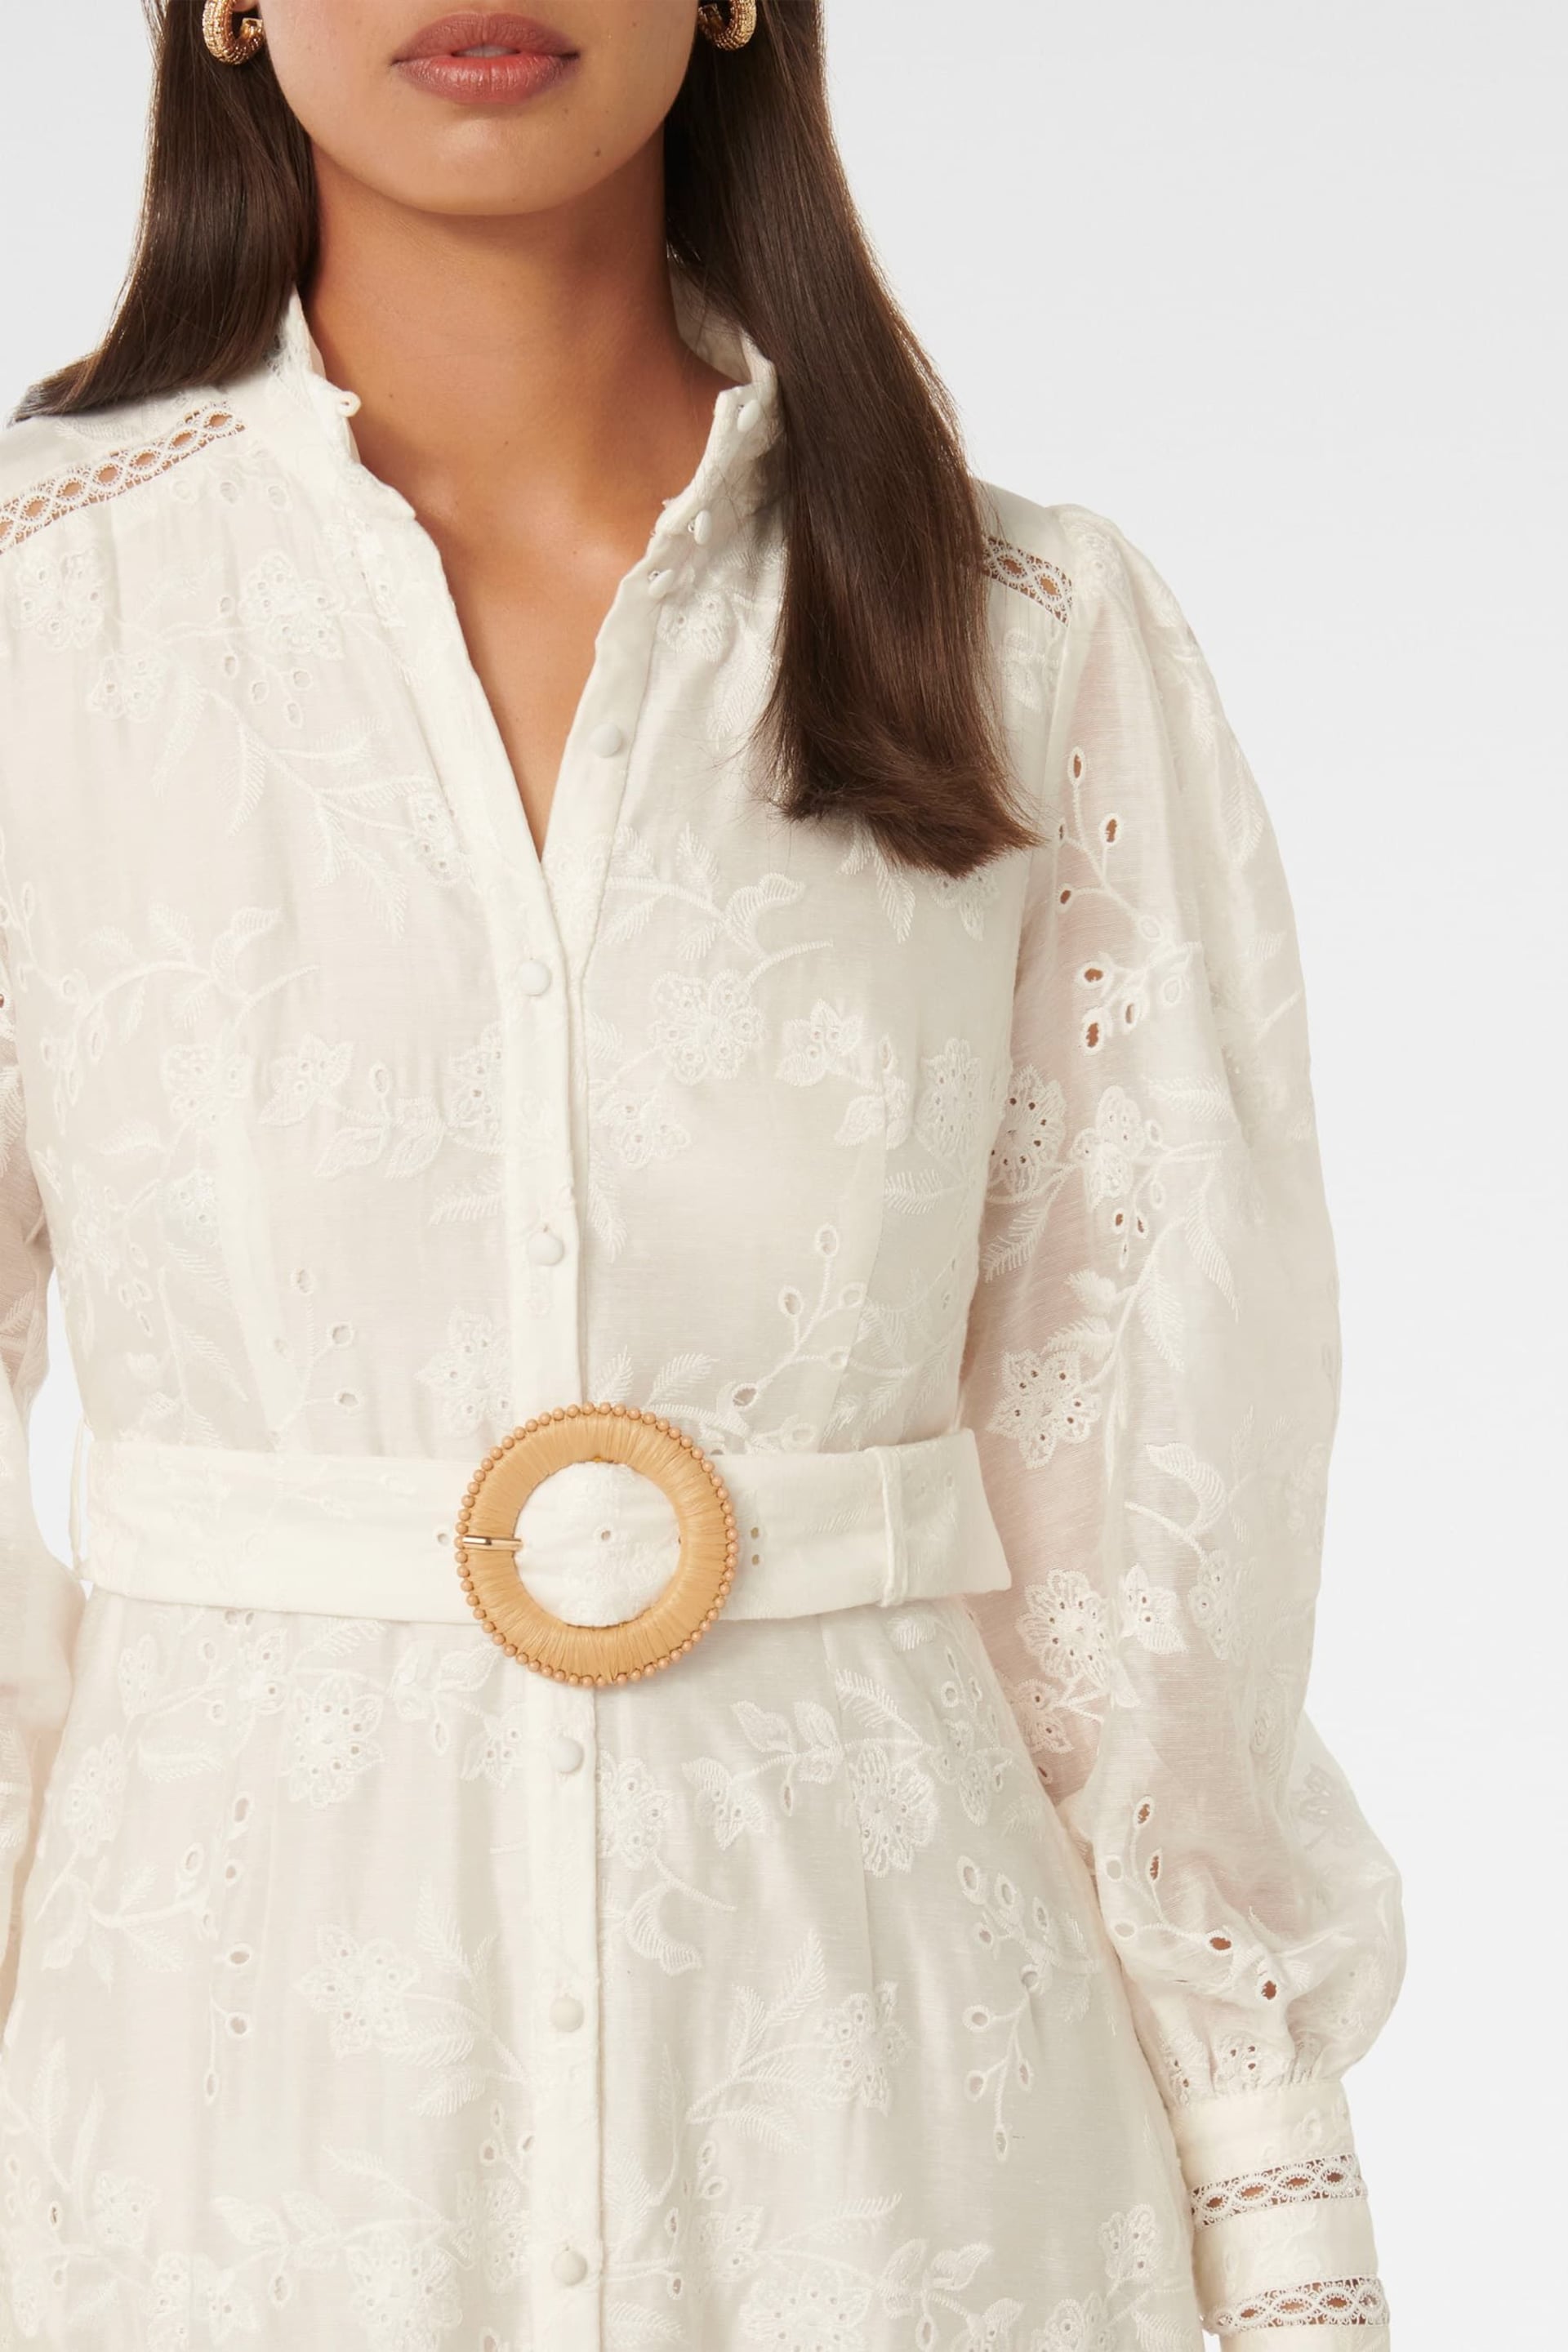 Forever New White Autumn Embroidered Midi Dress contains Linen - Image 2 of 4